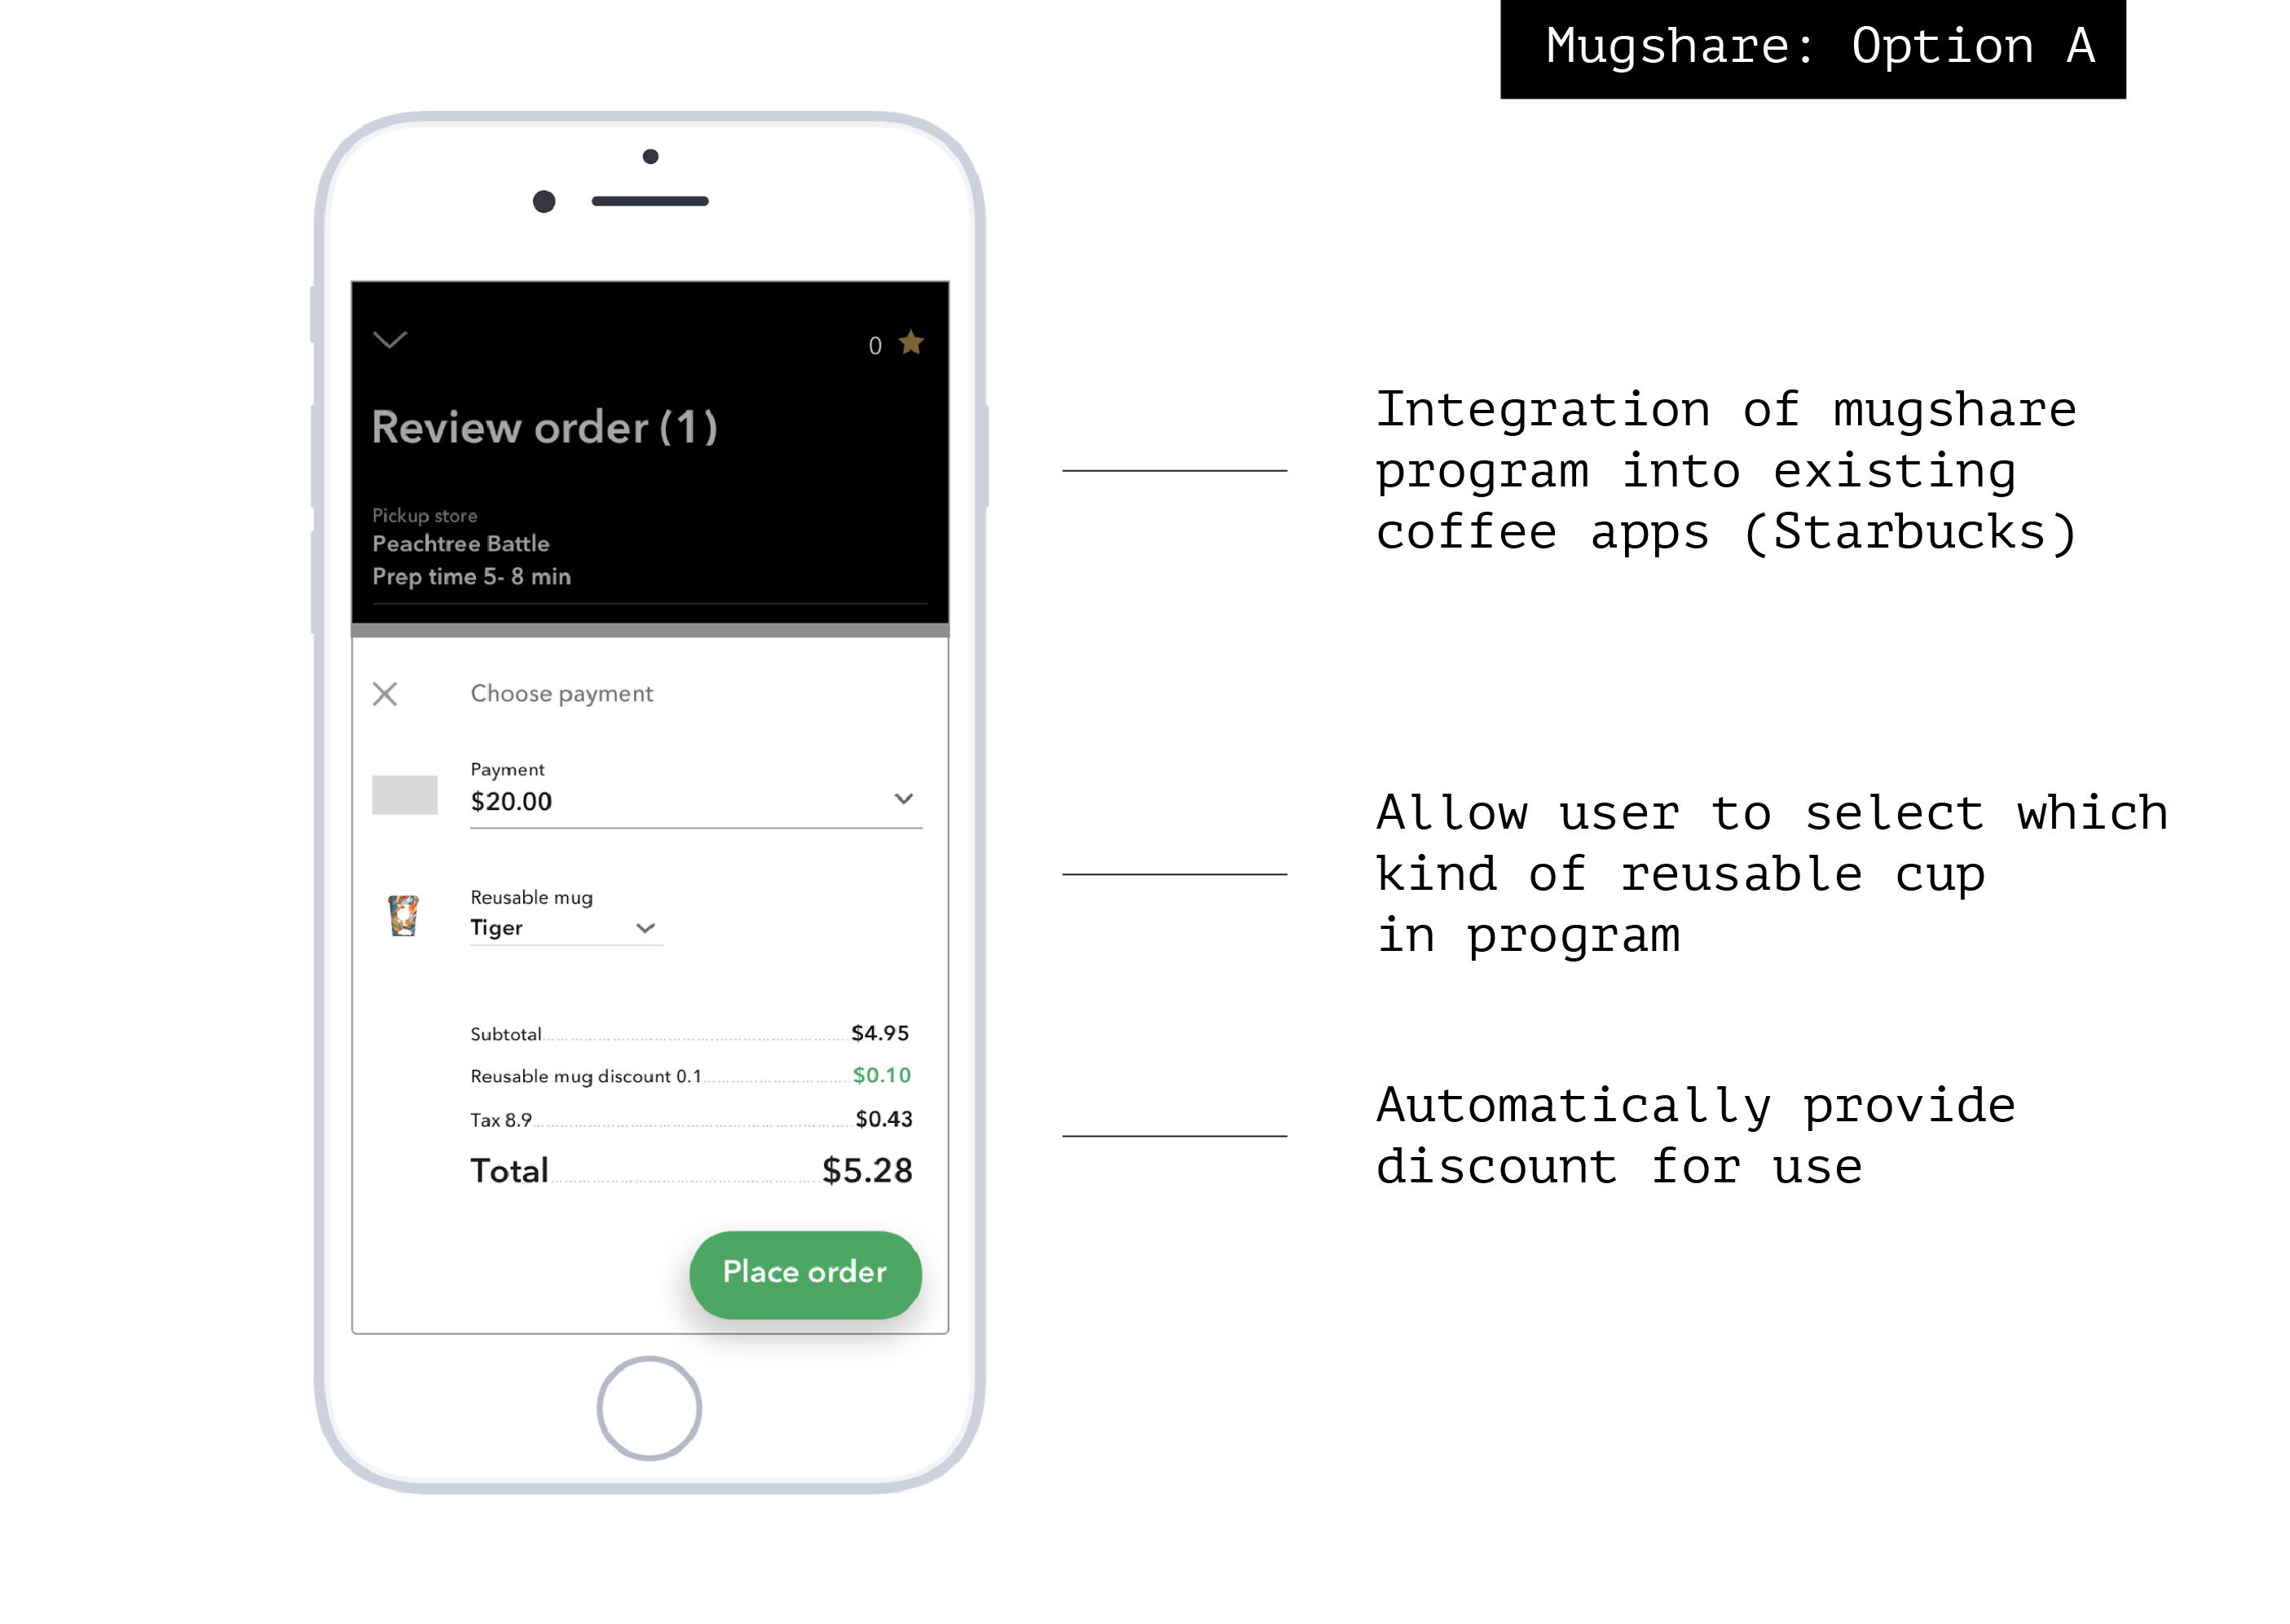 Mugshare option 1: a solution built into existing stores applications